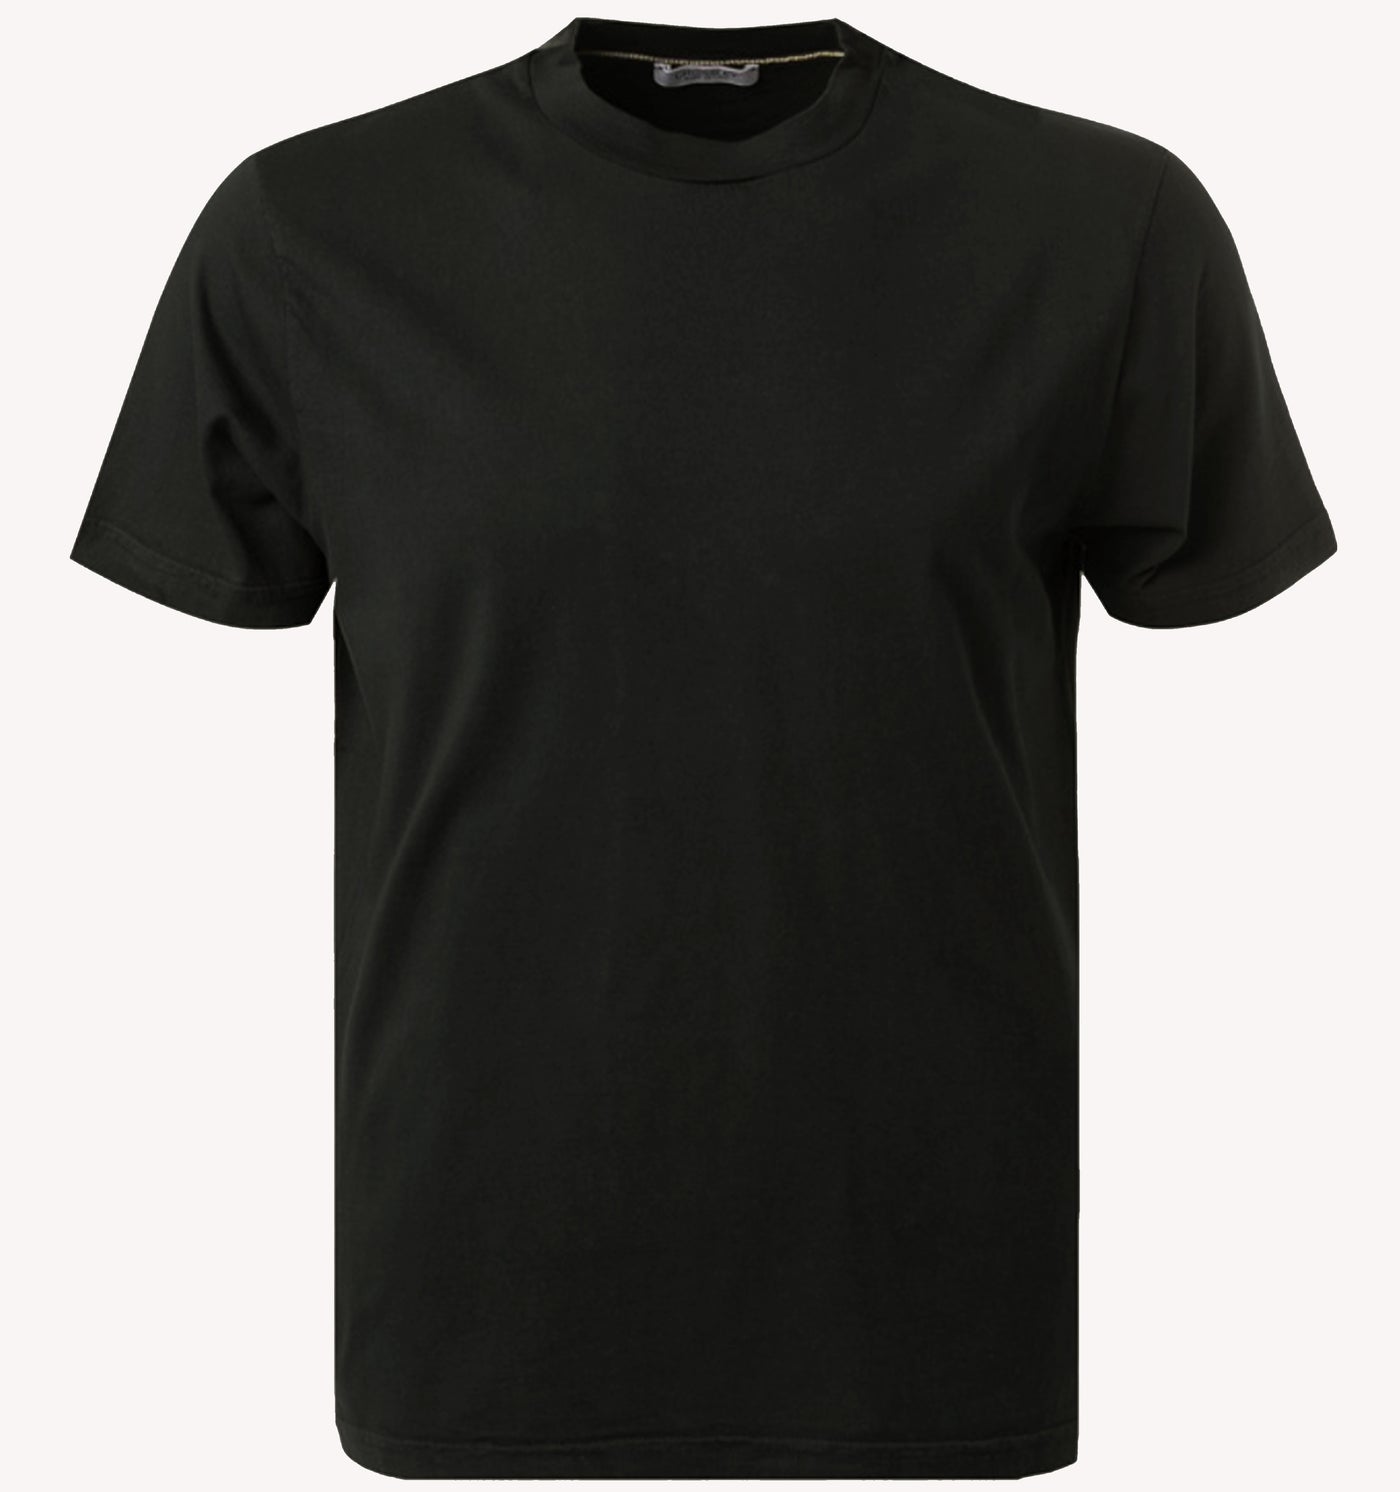 Crossley T-Shirt in Charcoal